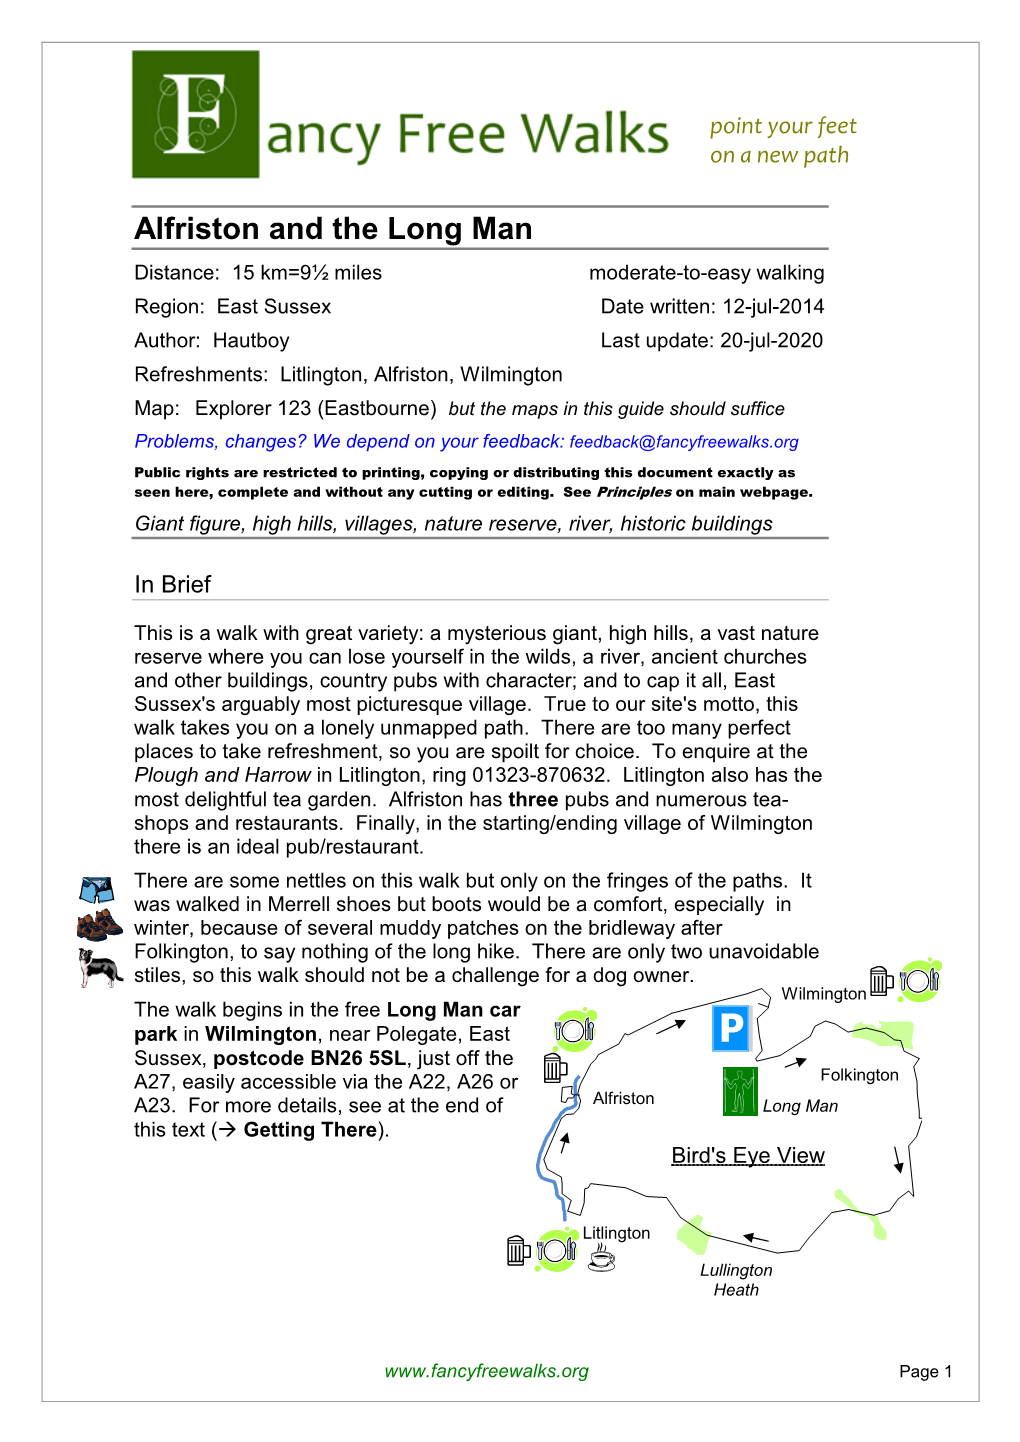 Alfriston and the Long